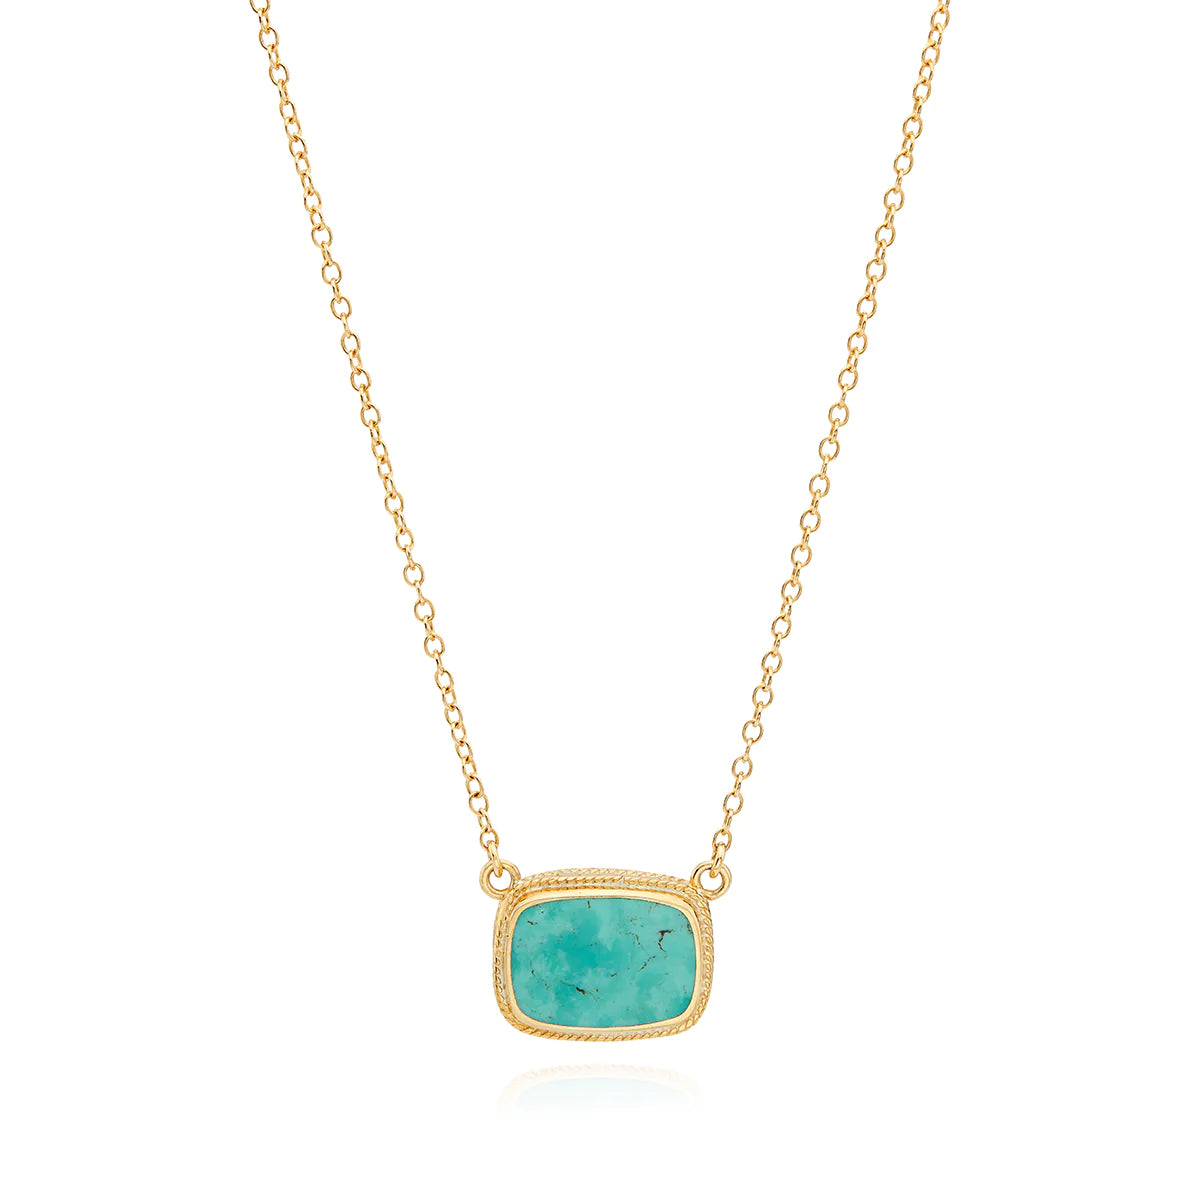 Turquoise cushion necklace with gold frame and chain